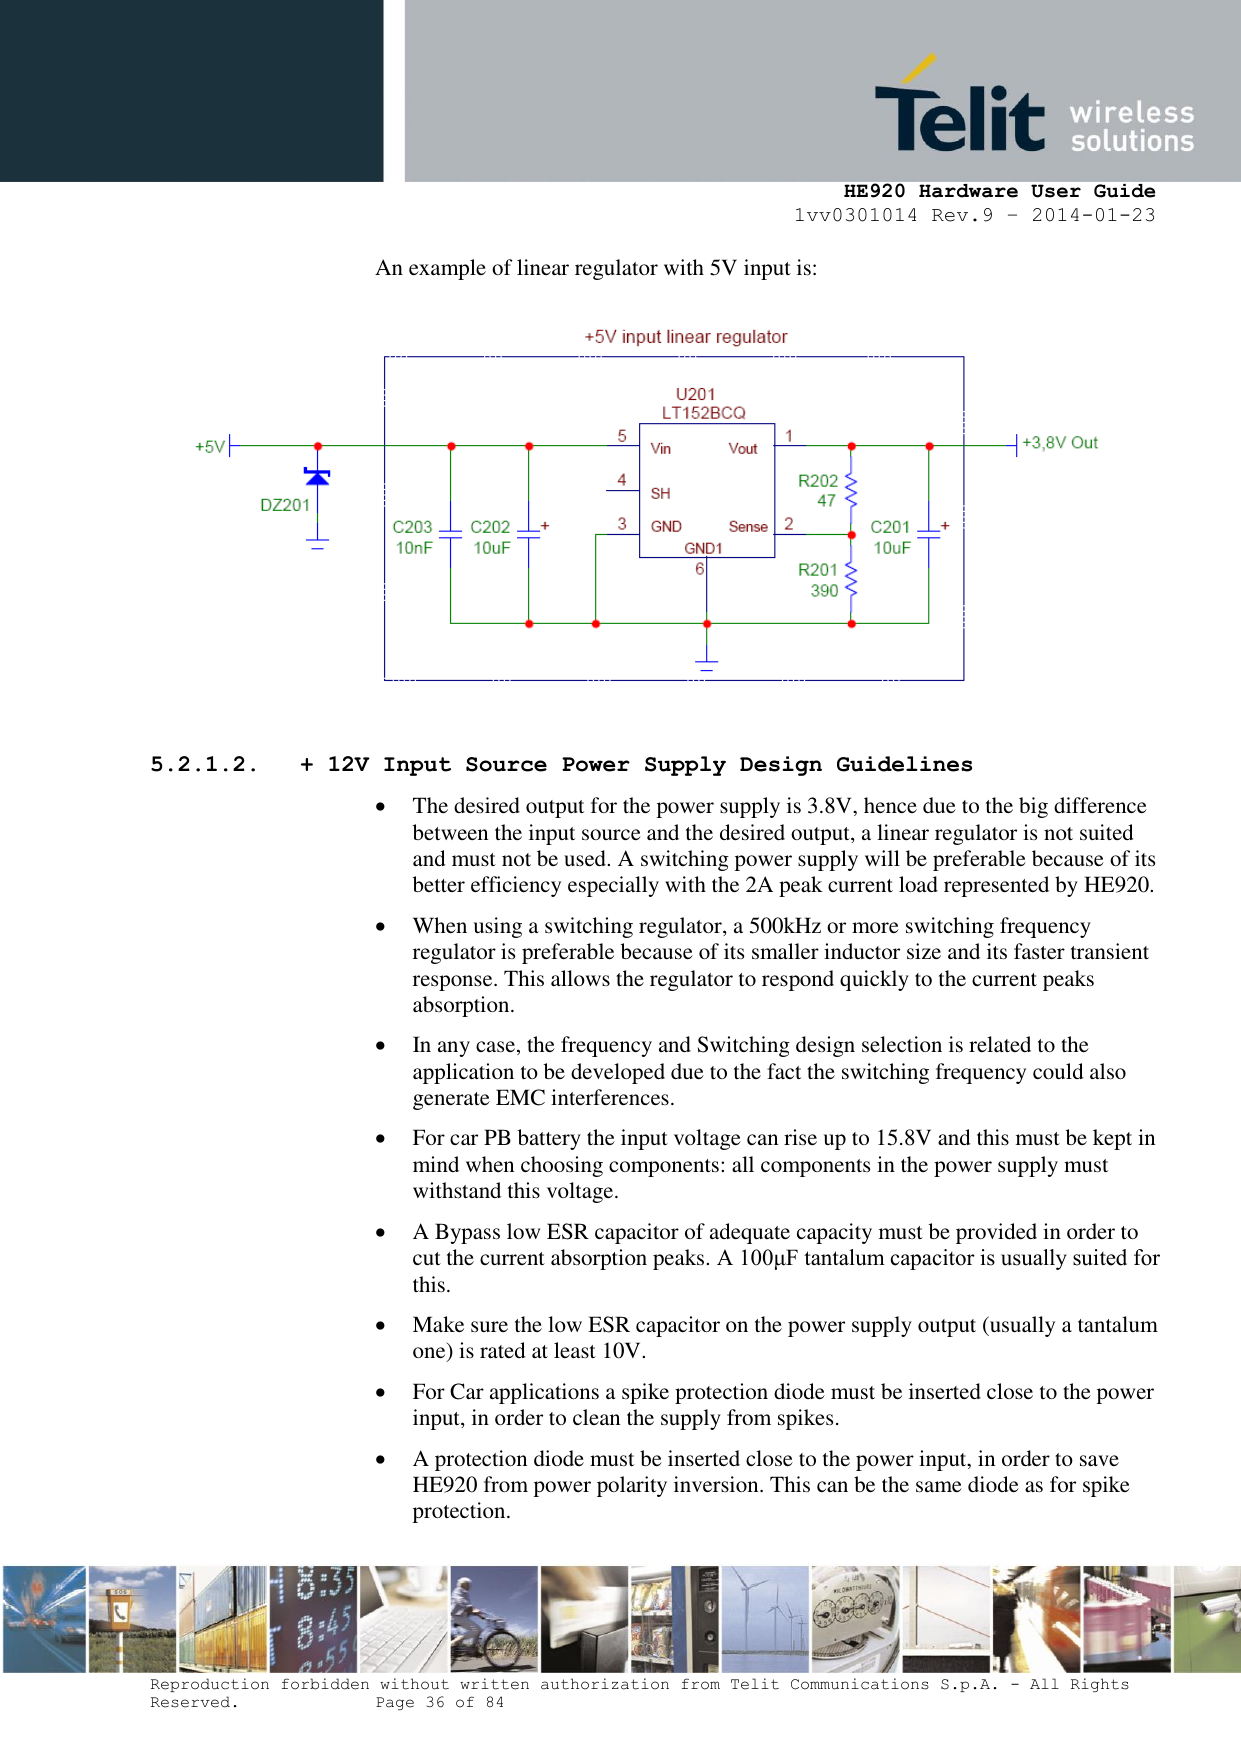     HE920 Hardware User Guide 1vv0301014 Rev.9 – 2014-01-23 Reproduction forbidden without written authorization from Telit Communications S.p.A. - All Rights Reserved.    Page 36 of 84  An example of linear regulator with 5V input is:  5.2.1.2. + 12V Input Source Power Supply Design Guidelines  The desired output for the power supply is 3.8V, hence due to the big difference between the input source and the desired output, a linear regulator is not suited and must not be used. A switching power supply will be preferable because of its better efficiency especially with the 2A peak current load represented by HE920.   When using a switching regulator, a 500kHz or more switching frequency regulator is preferable because of its smaller inductor size and its faster transient response. This allows the regulator to respond quickly to the current peaks absorption.   In any case, the frequency and Switching design selection is related to the application to be developed due to the fact the switching frequency could also generate EMC interferences.  For car PB battery the input voltage can rise up to 15.8V and this must be kept in mind when choosing components: all components in the power supply must withstand this voltage.  A Bypass low ESR capacitor of adequate capacity must be provided in order to cut the current absorption peaks. A 100μF tantalum capacitor is usually suited for this.  Make sure the low ESR capacitor on the power supply output (usually a tantalum one) is rated at least 10V.  For Car applications a spike protection diode must be inserted close to the power input, in order to clean the supply from spikes.   A protection diode must be inserted close to the power input, in order to save HE920 from power polarity inversion. This can be the same diode as for spike protection. 